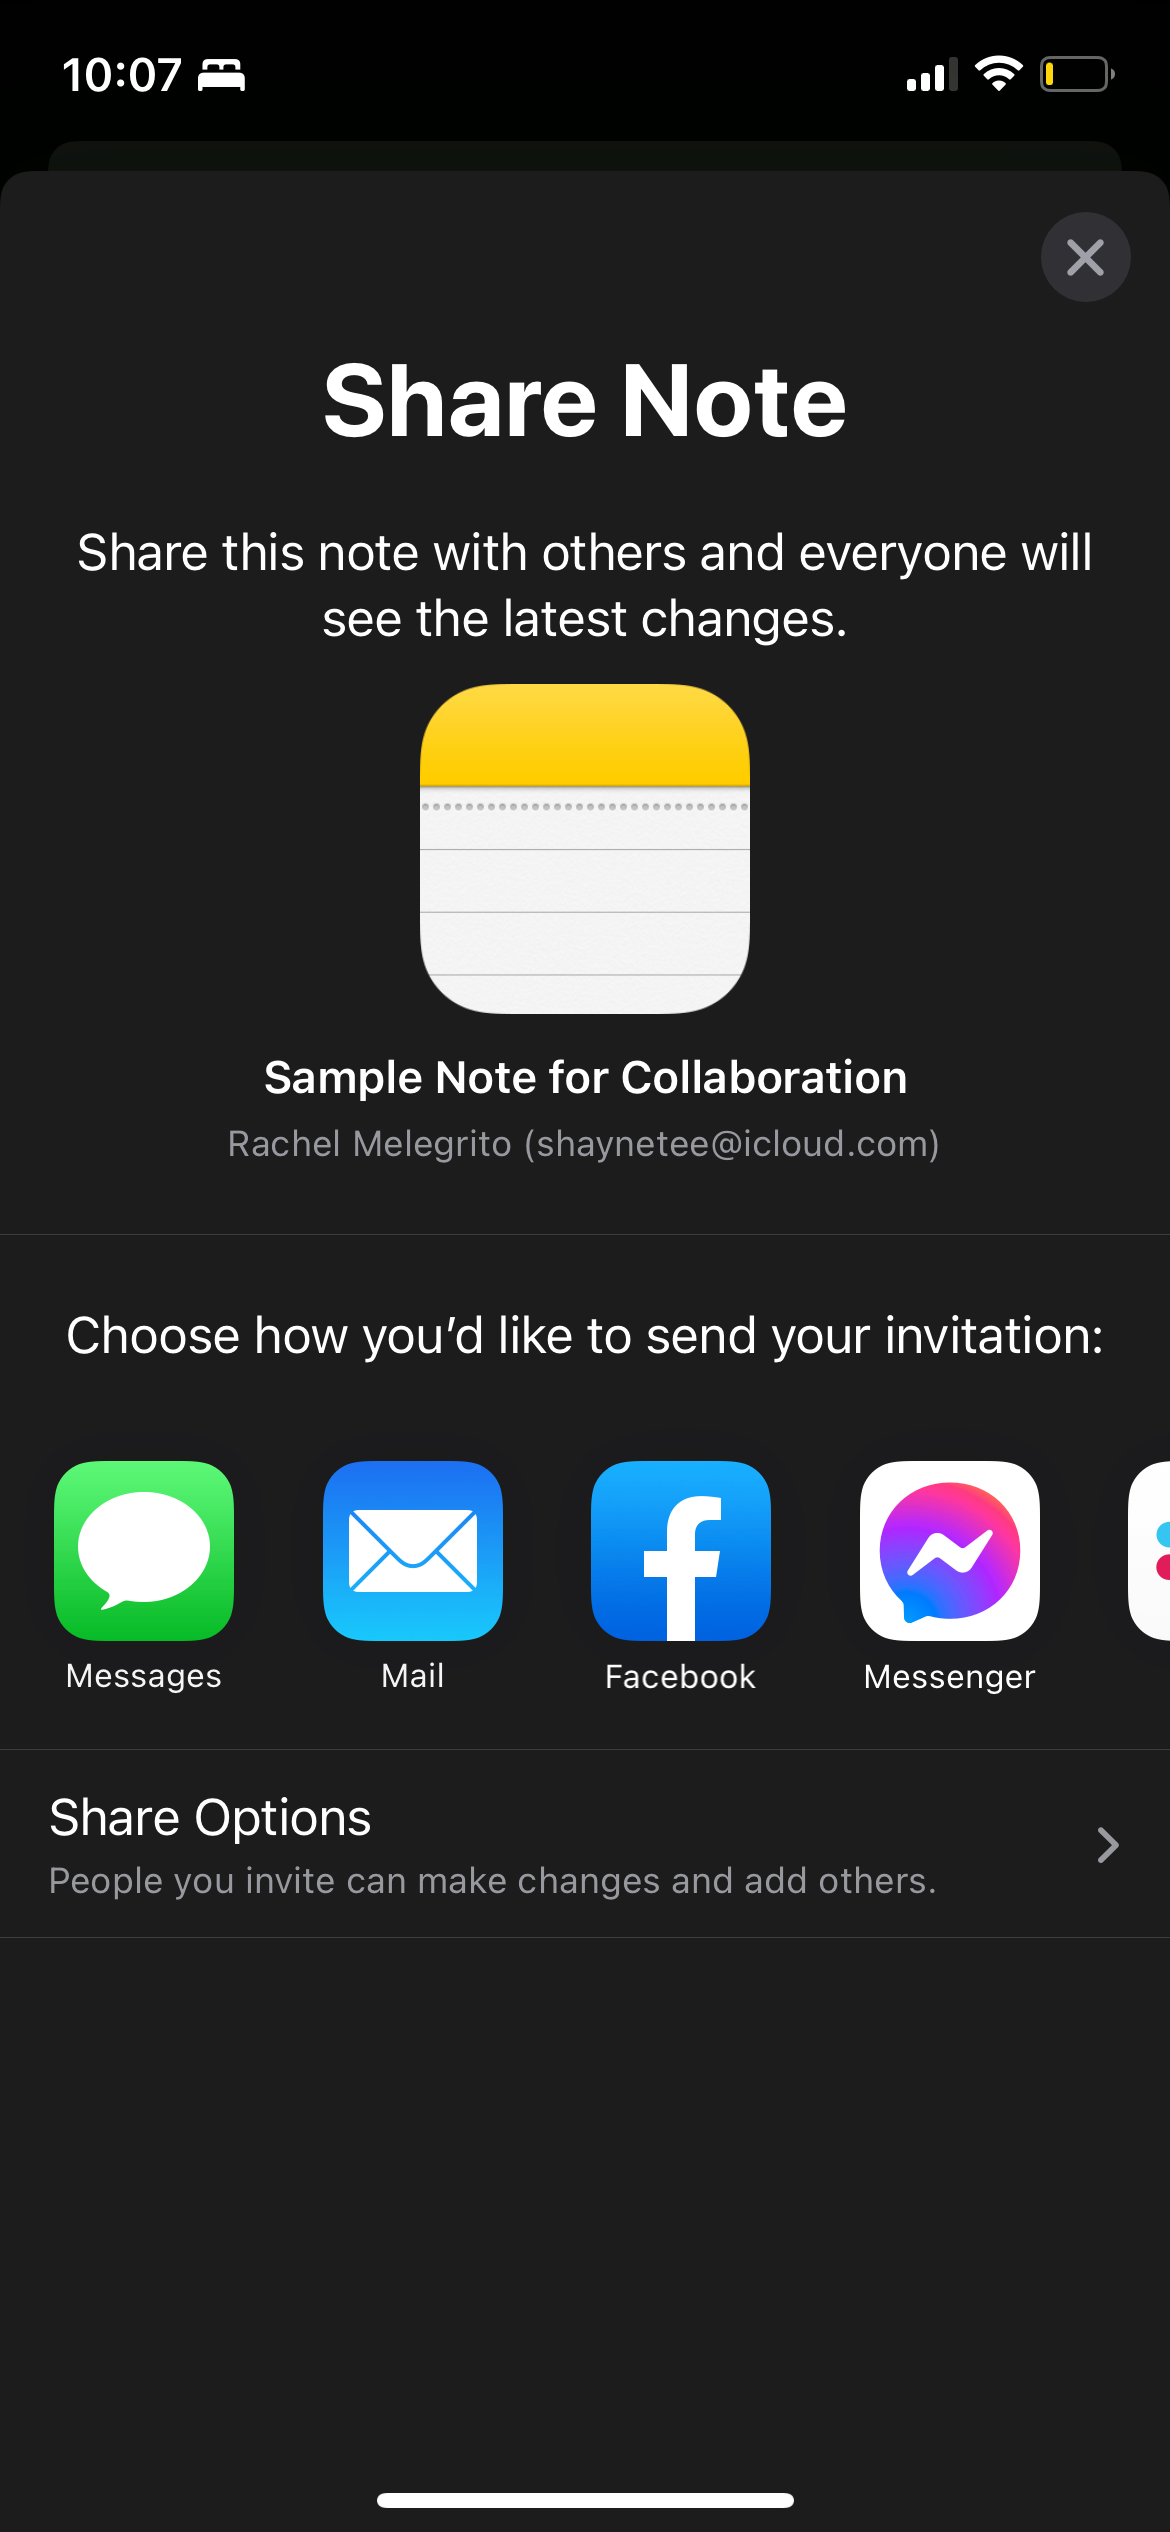 Share Note Options